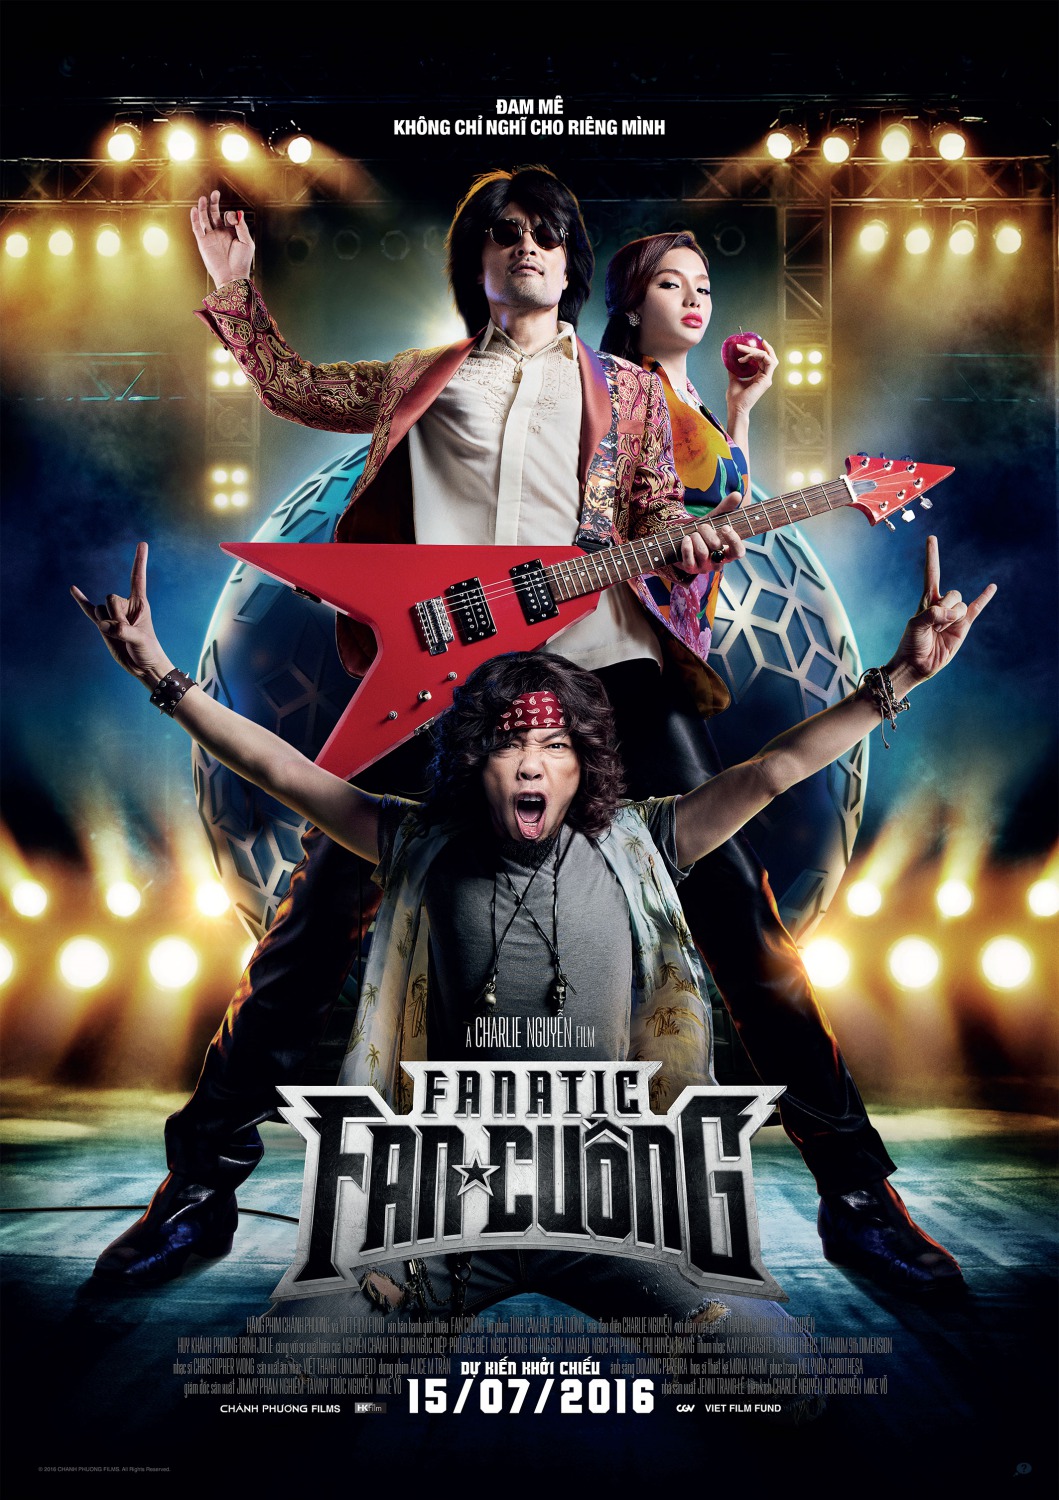 Extra Large Movie Poster Image for Fanatic (#2 of 2)